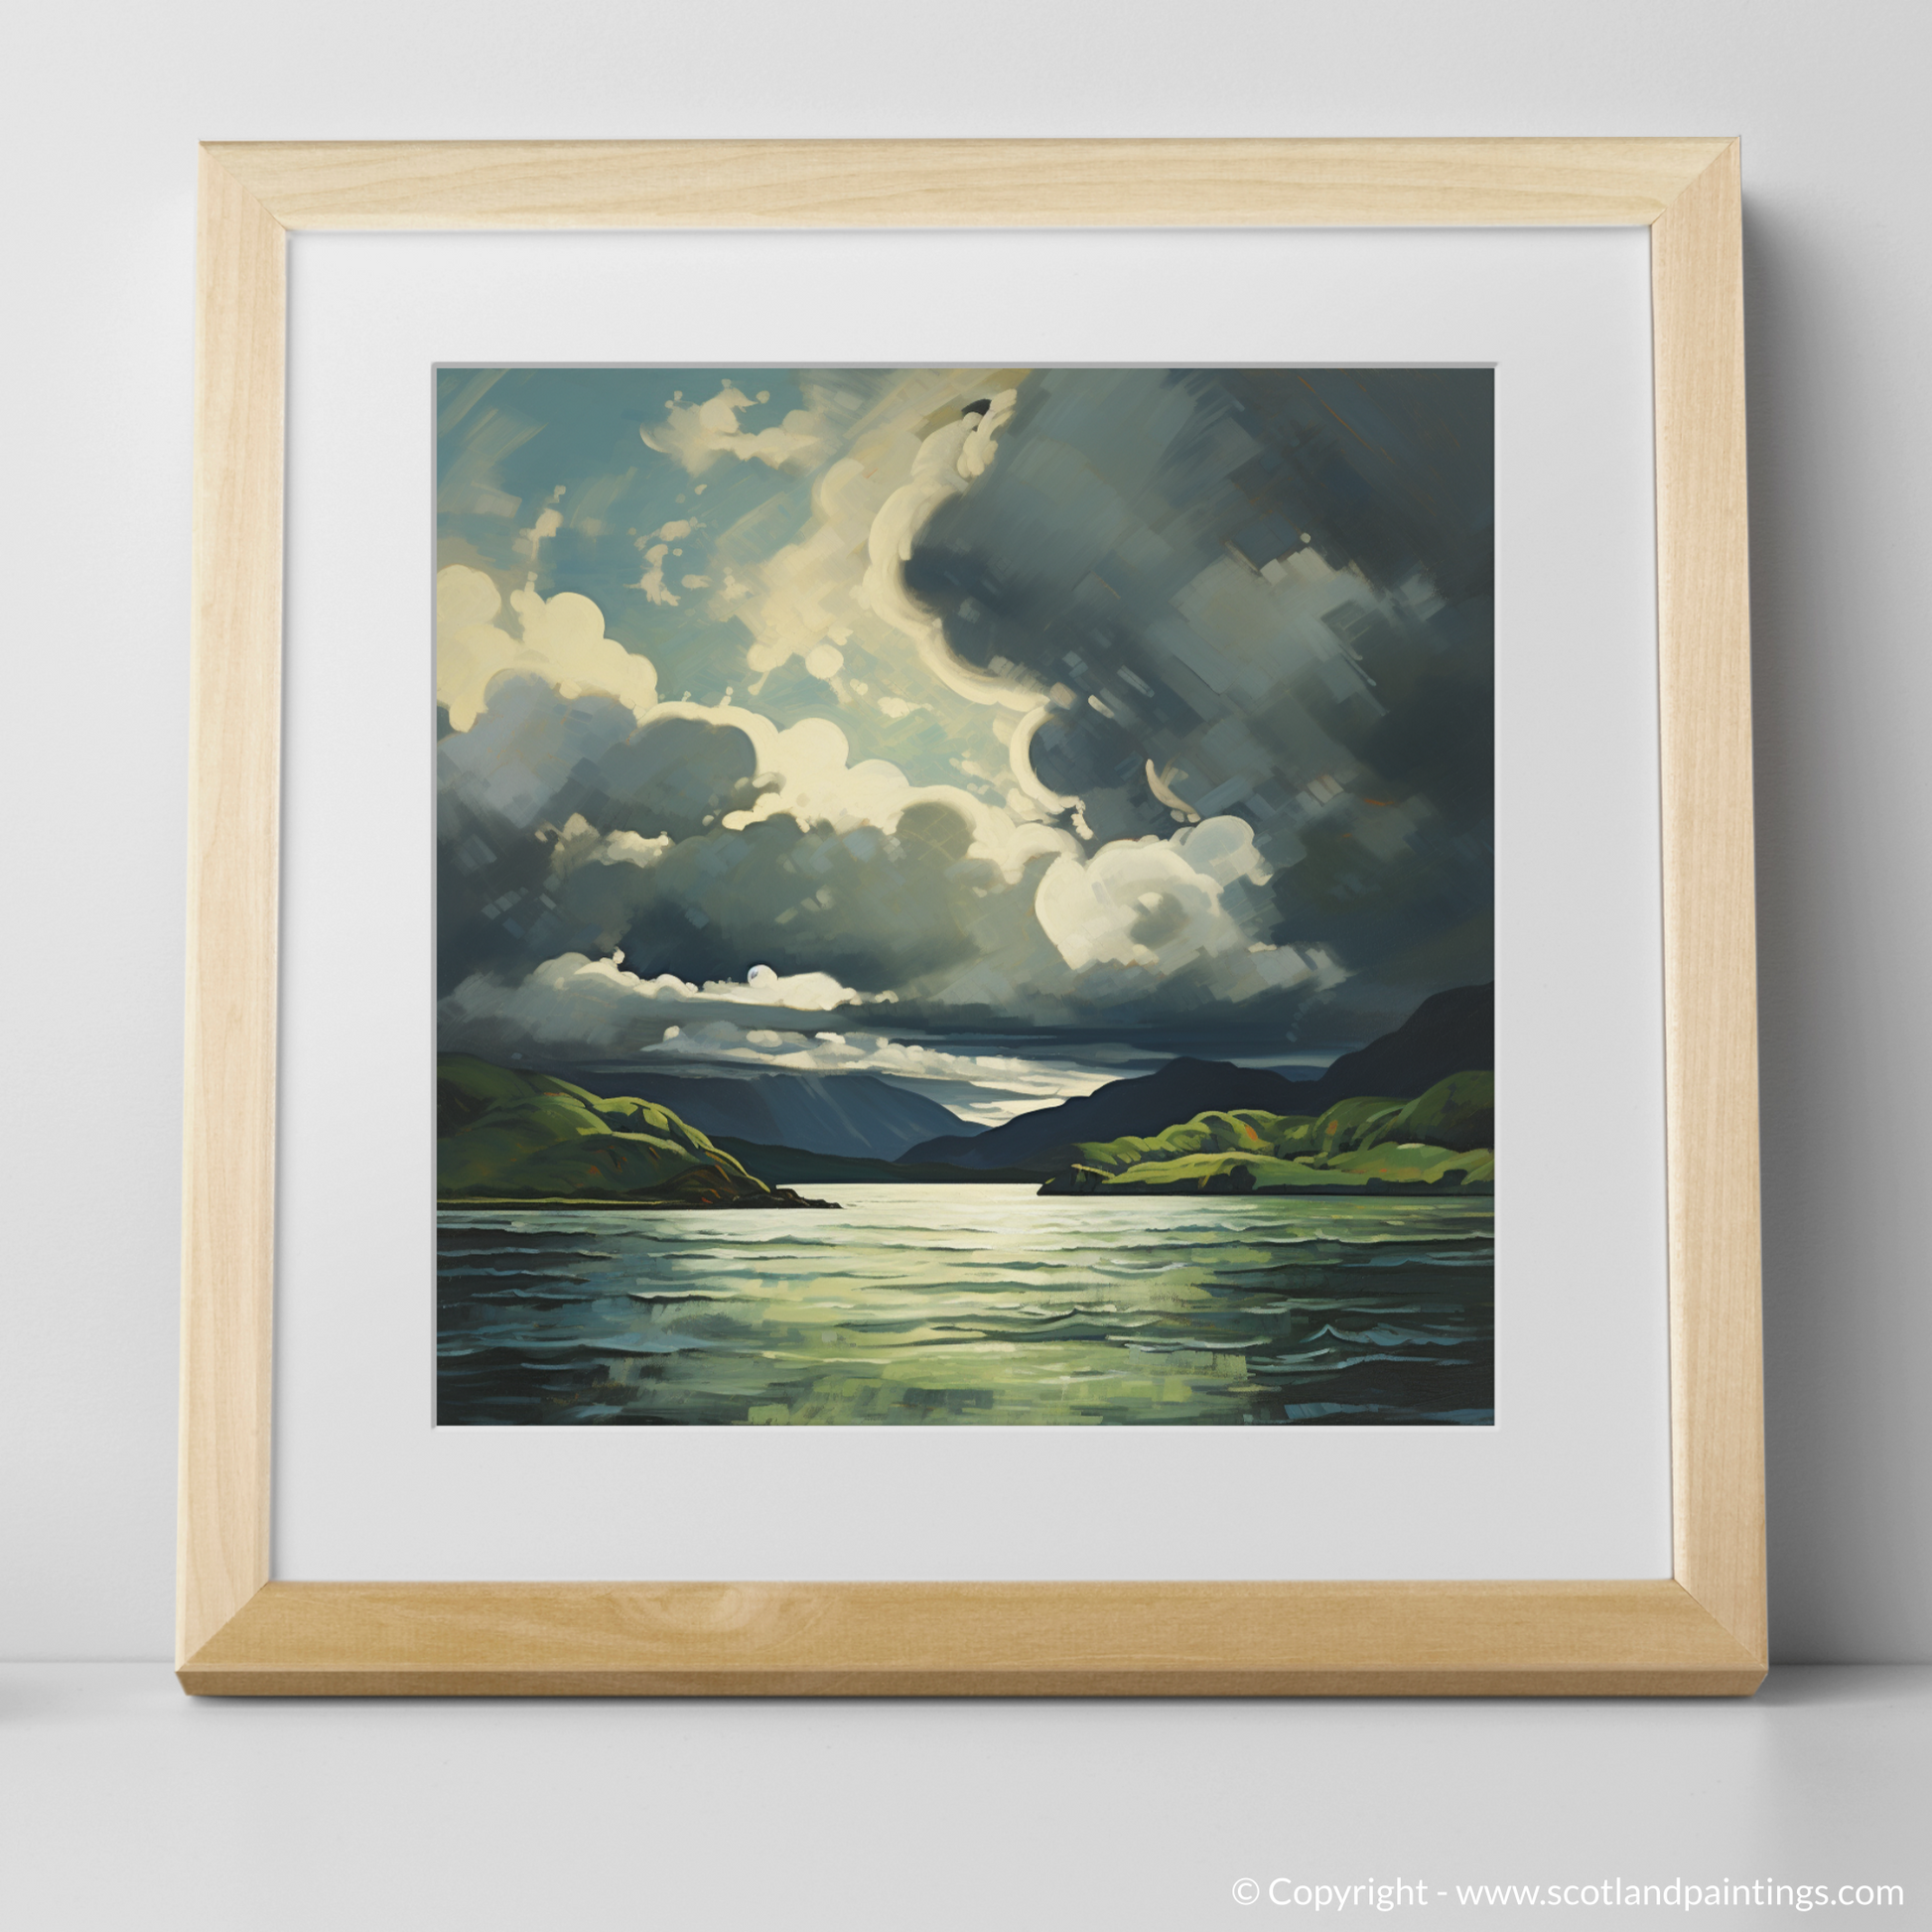 Art Print of Storm clouds above Loch Lomond with a natural frame